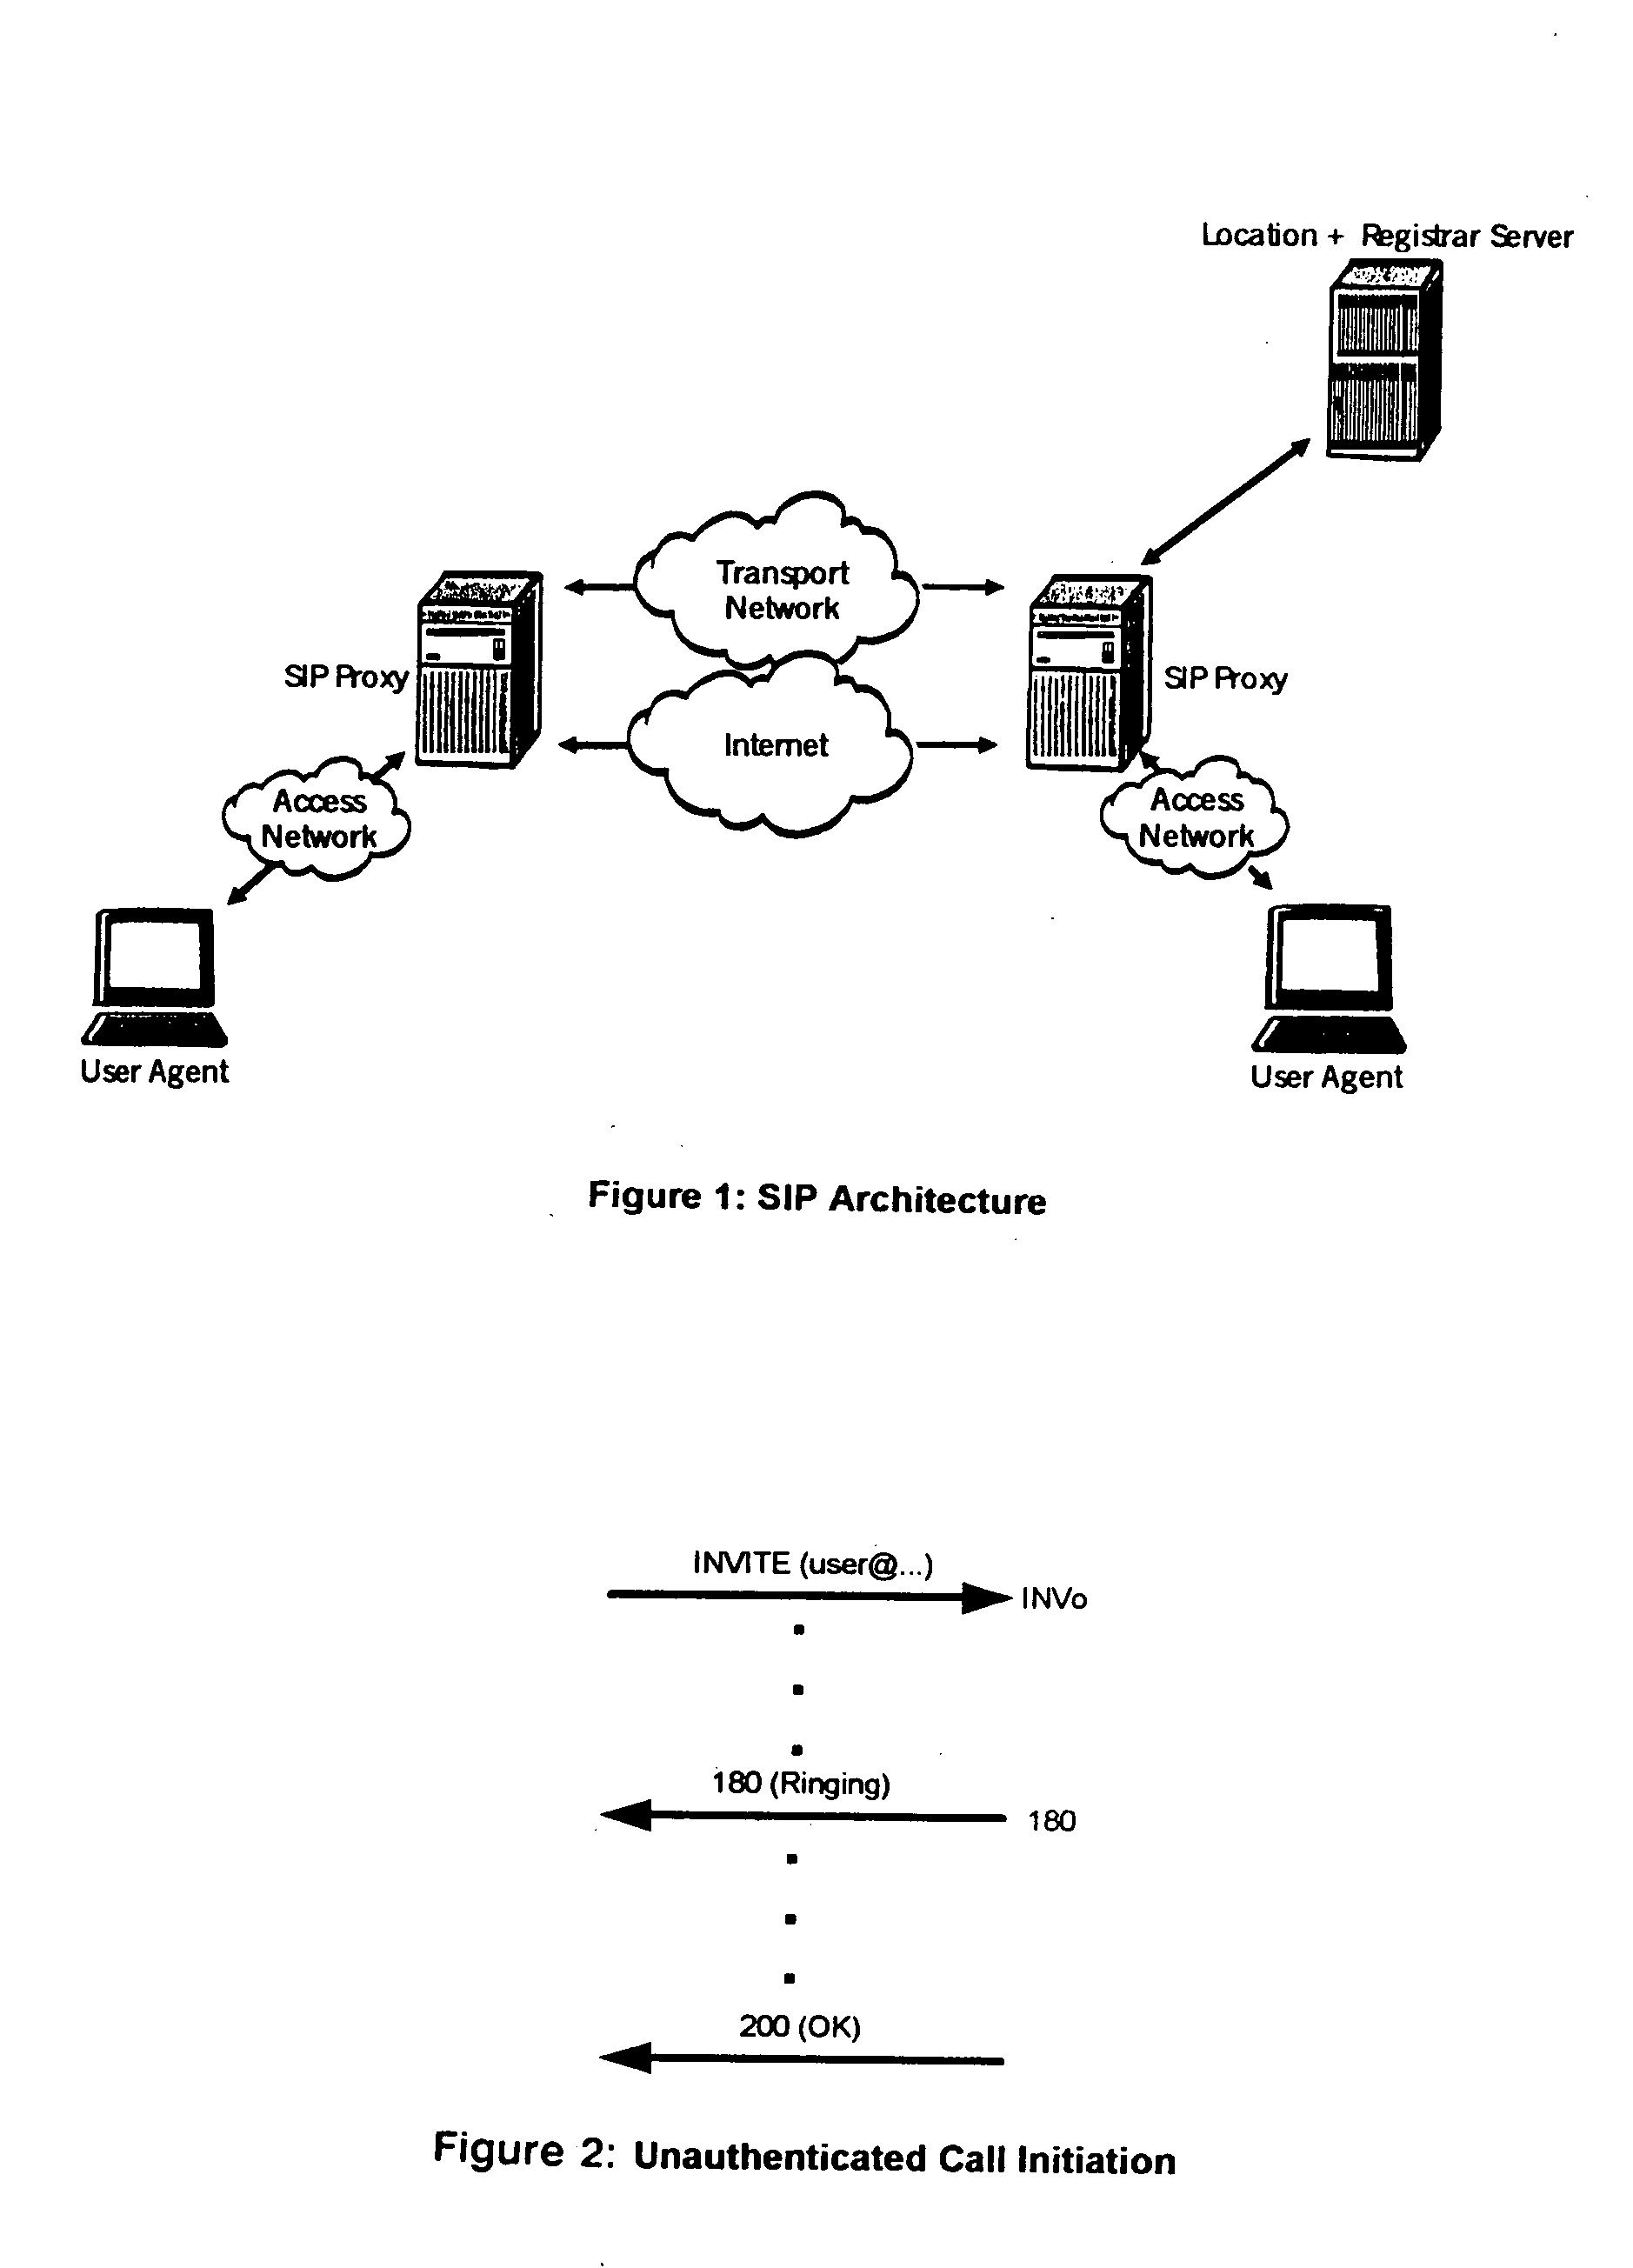 Detection of denial of service attacks against SIP (session initiation protocol) elements